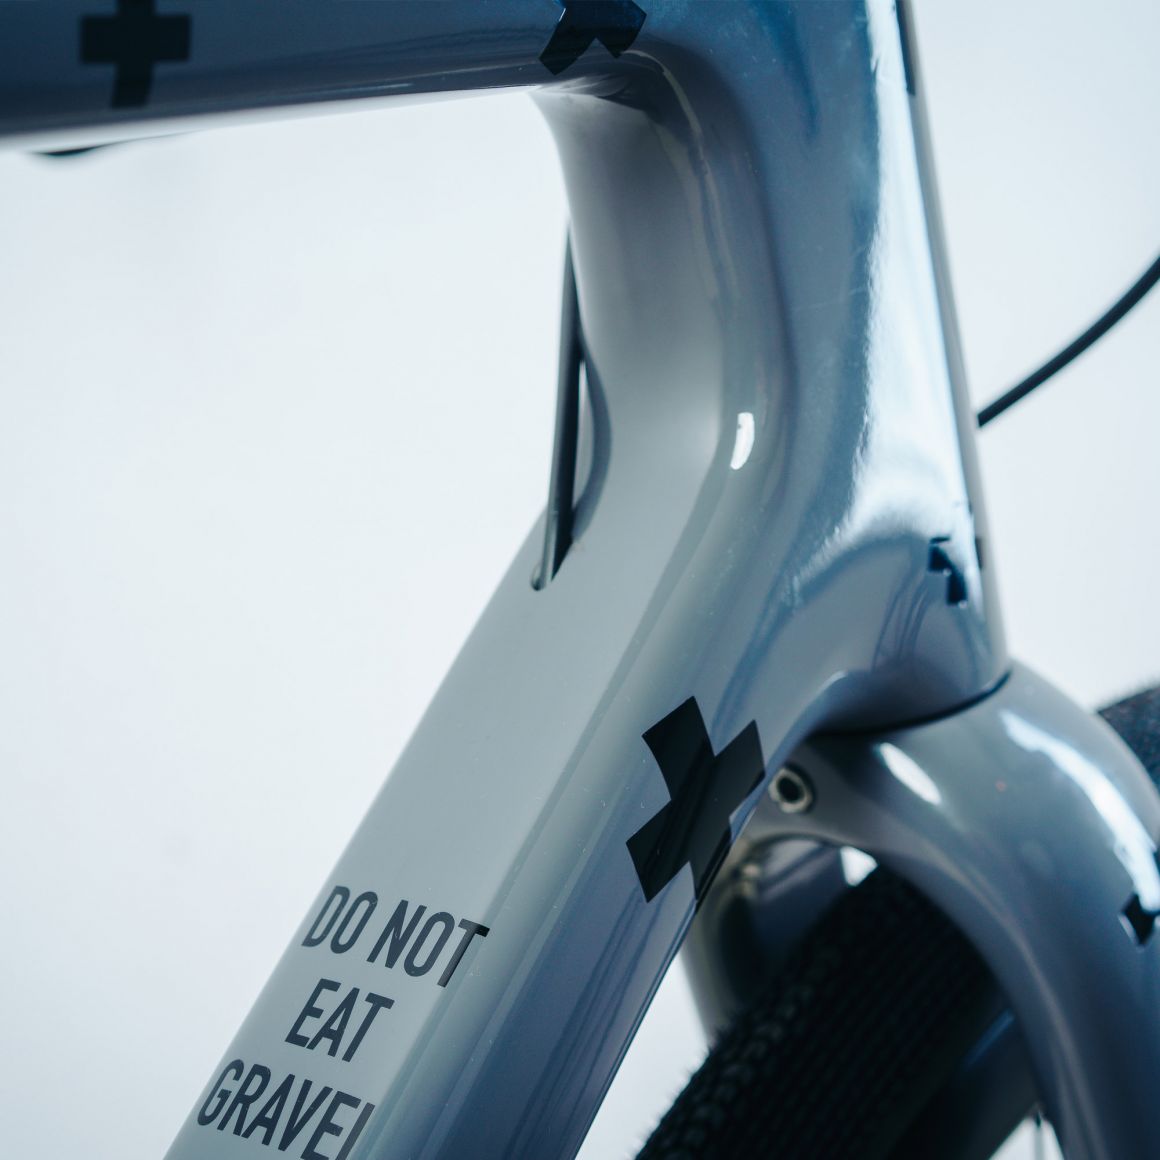 Internal Cable routing in our Gravelbike